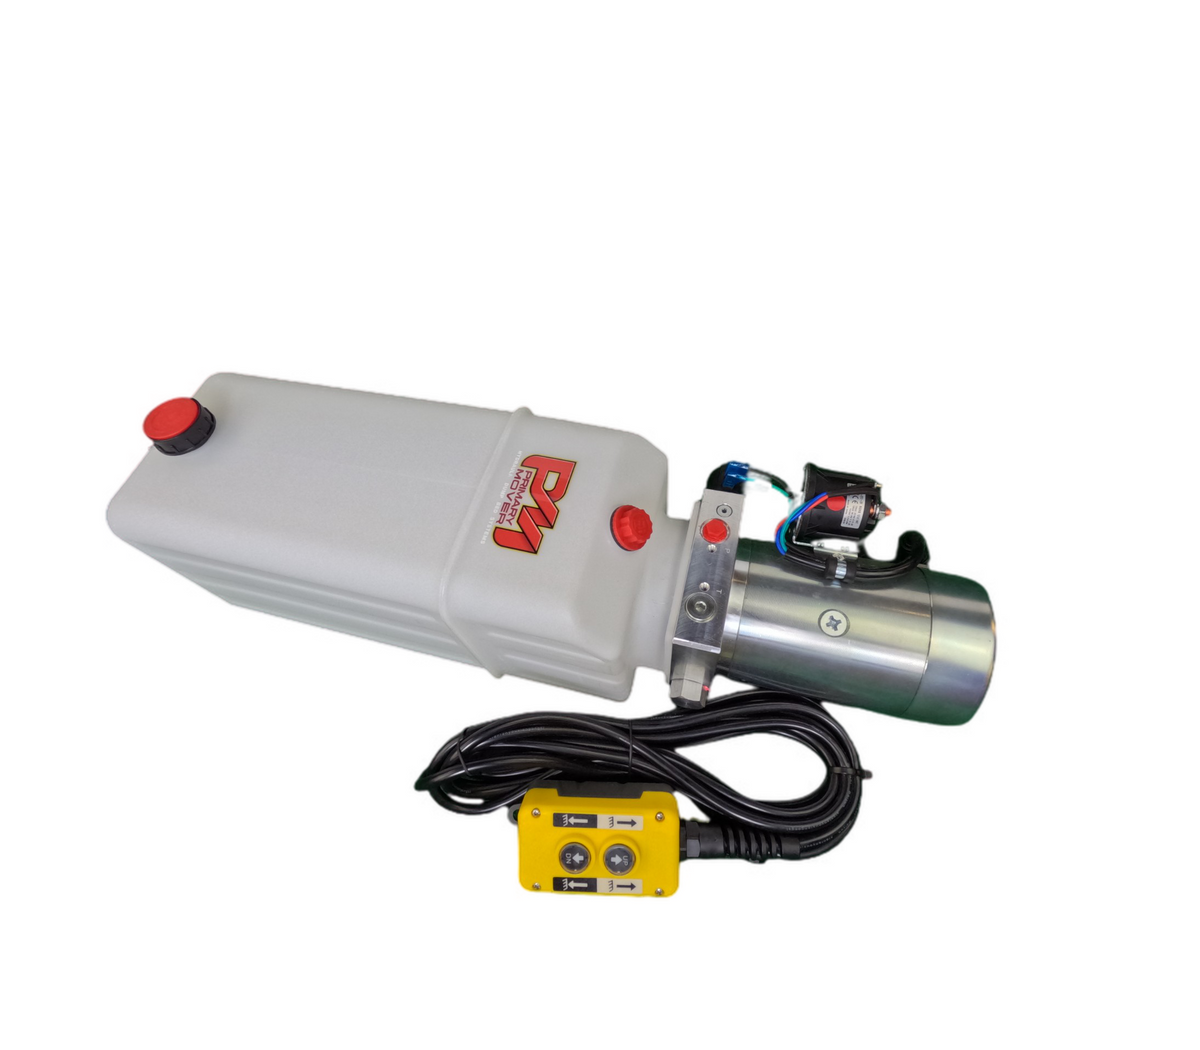 A white plastic cylinder with a red button, black wires, and a yellow box, showcasing the DLH 12V Single-Acting Hydraulic Pump - Poly Reservoir for efficient hydraulic operations.